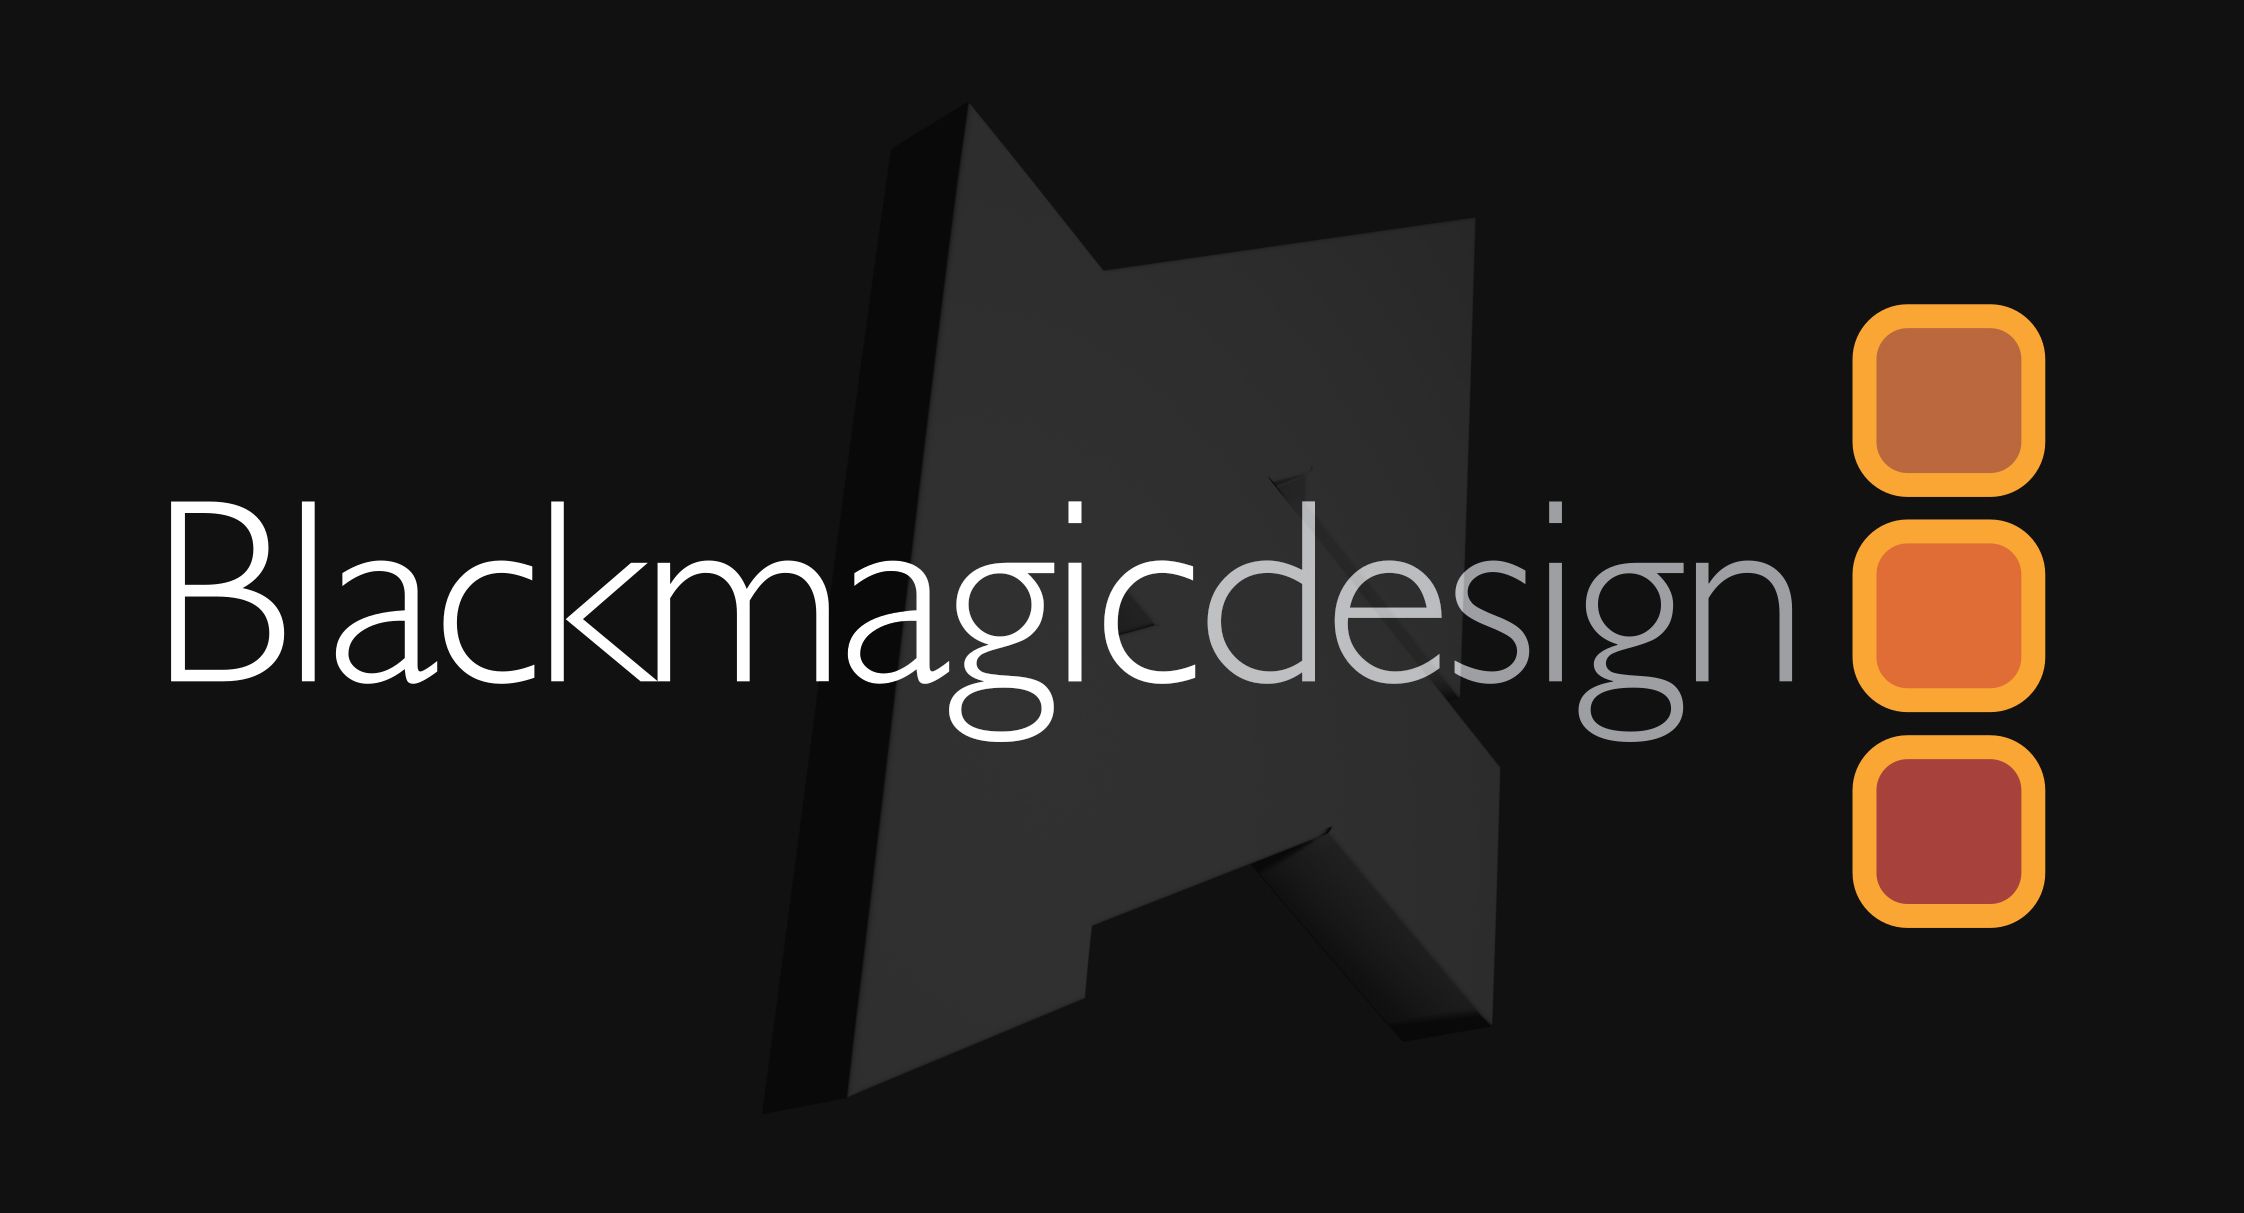 Blackmagic Design is bringing its free camera app to Android